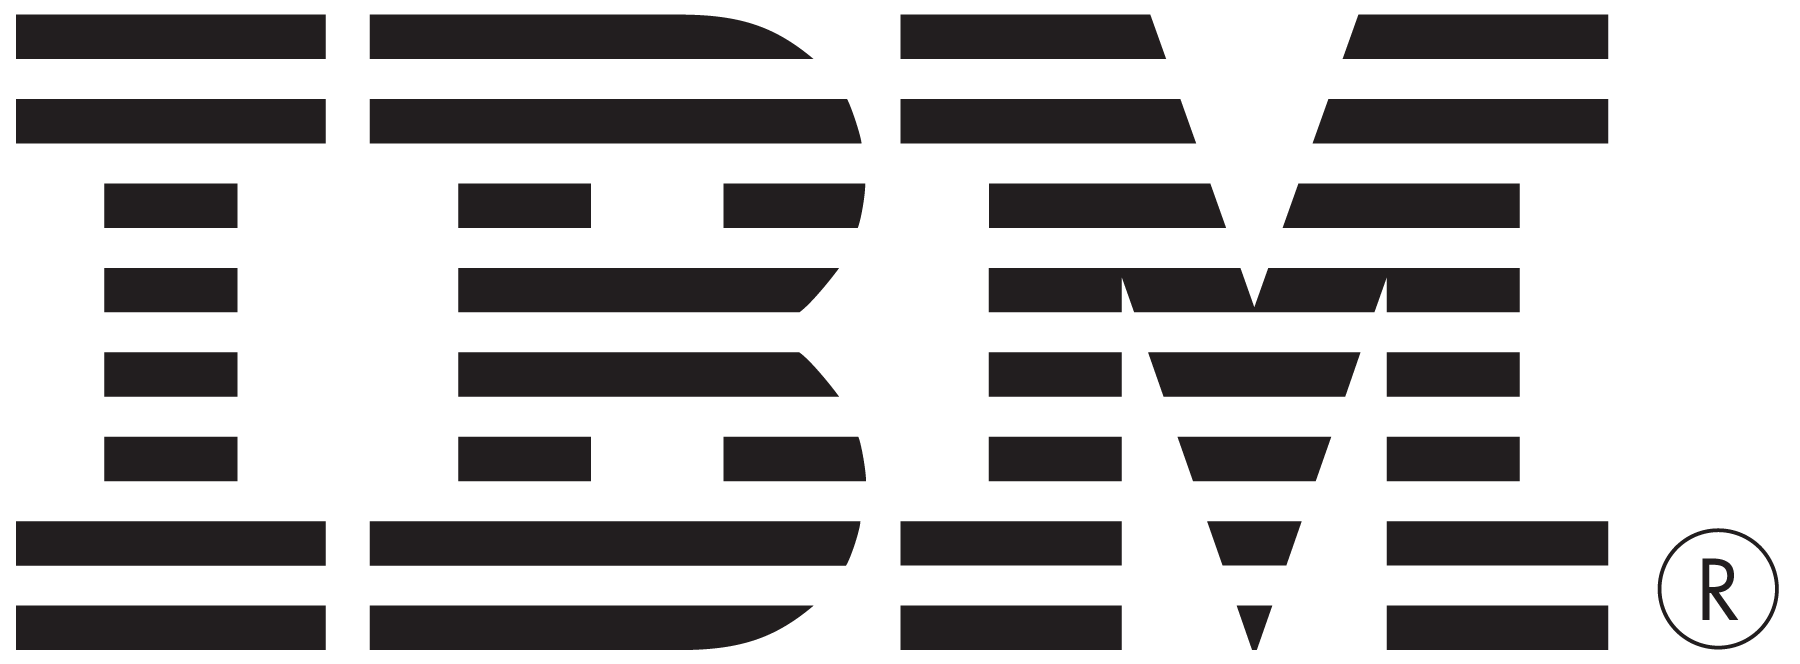 Current IBM Logo - This Key Part of IBM Is Growing Again - The Motley Fool